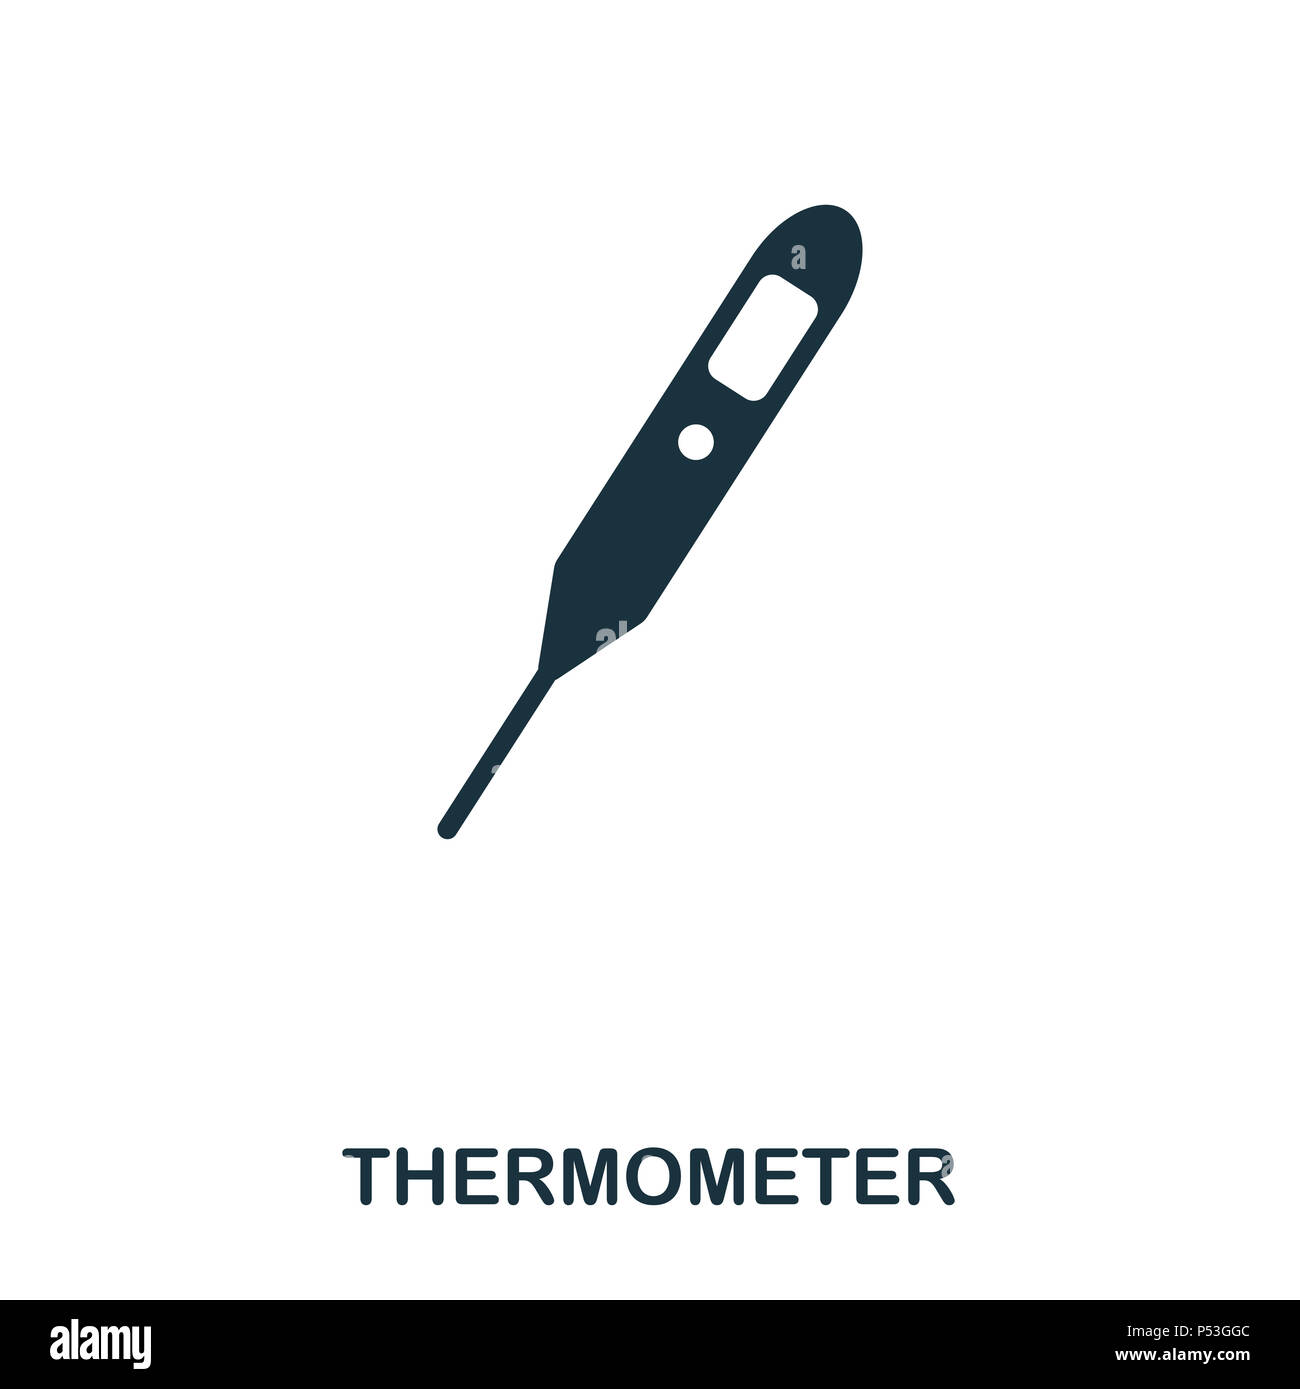 Thermometer icon. Line style icon design. UI. Illustration of thermometer icon. Pictogram isolated on white. Ready to use in web design, apps, software, print. Stock Photo